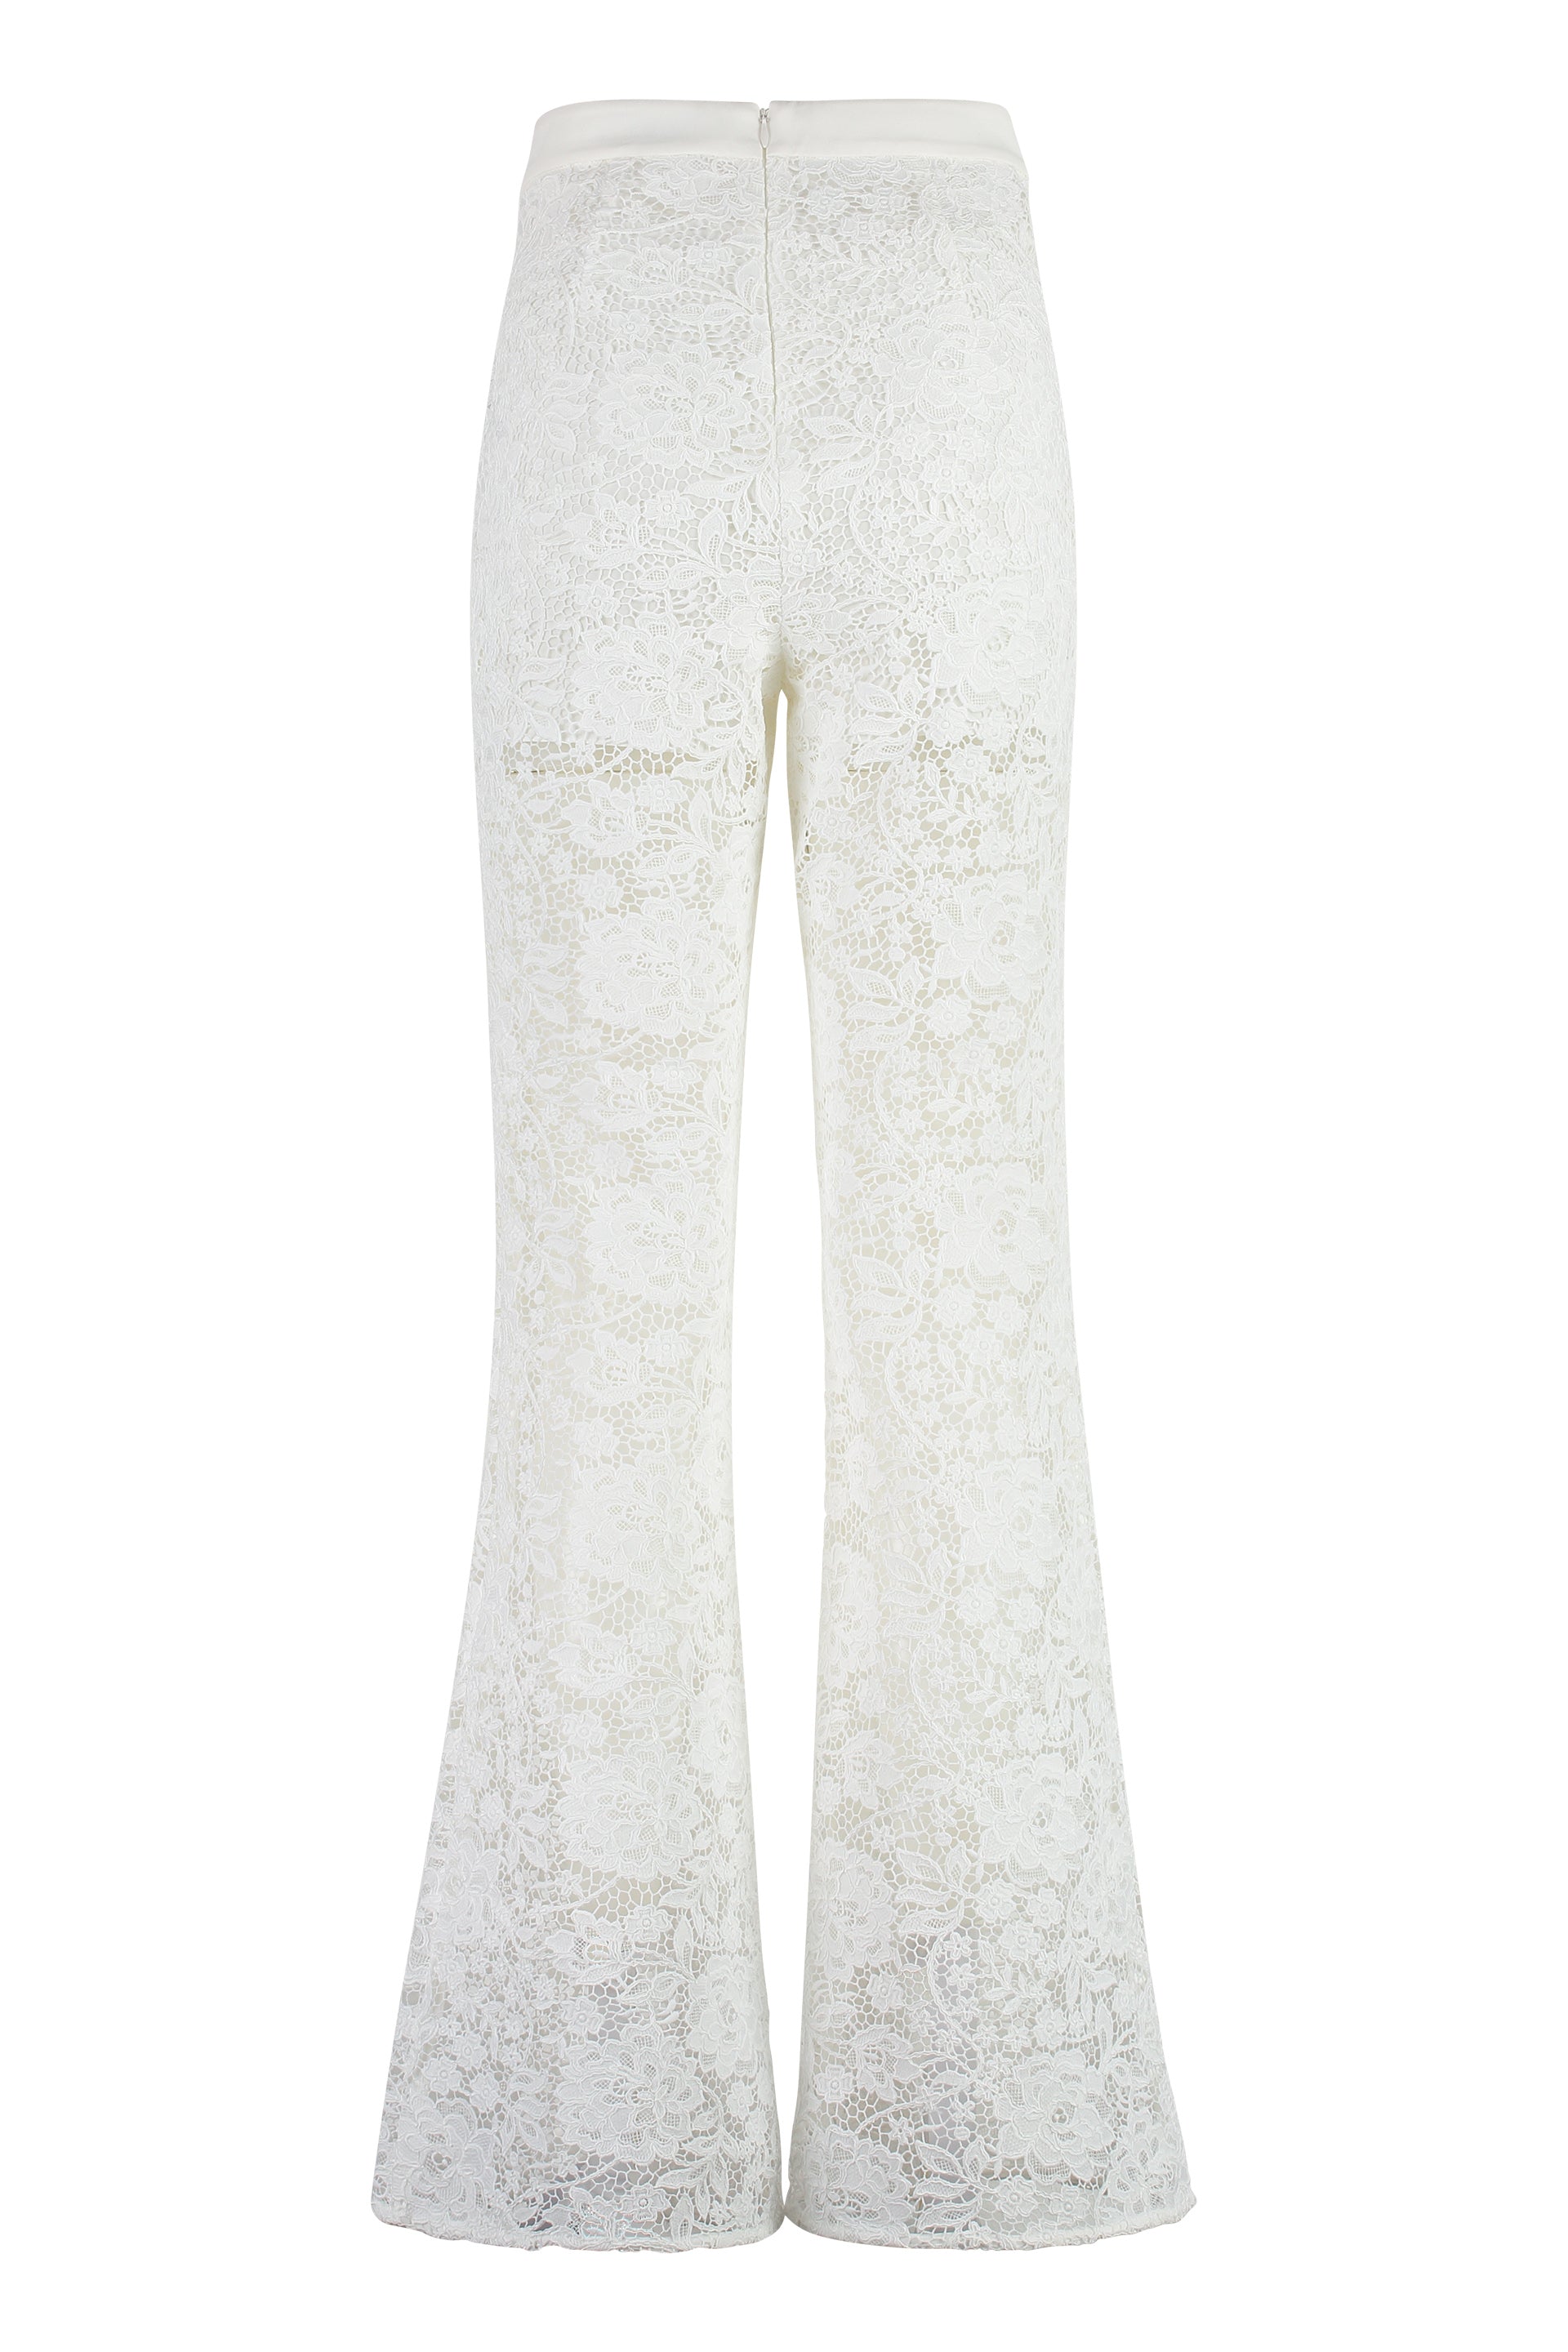 Pan Con Chocolate - White Lace Trousers | Childrensalon Outlet